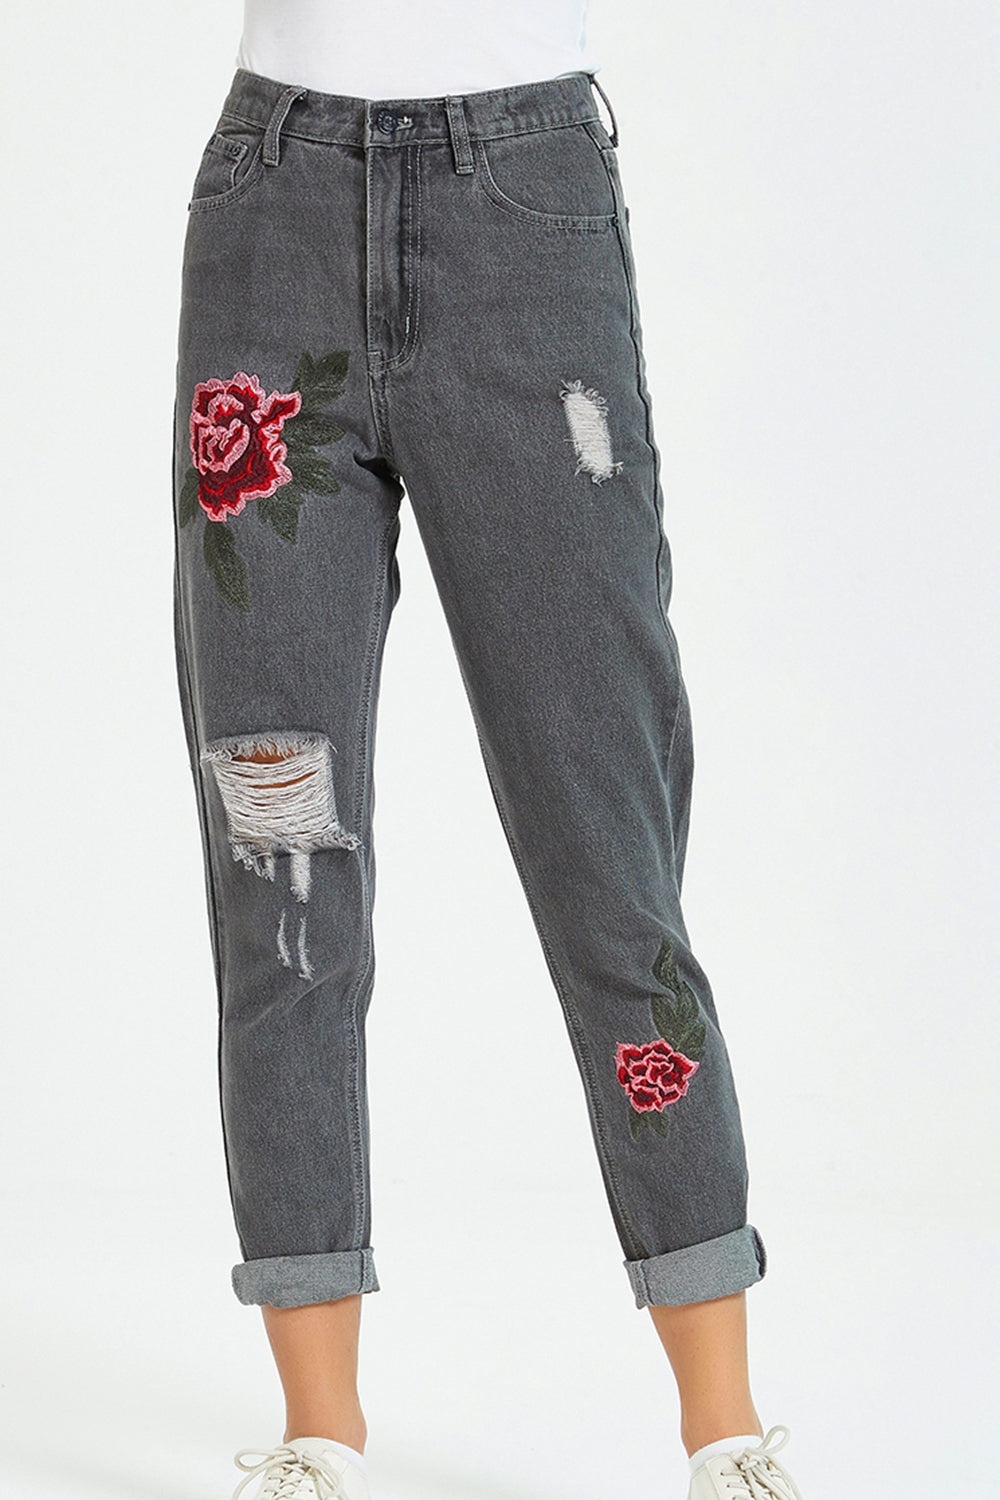 Dim Gray Flower Embroidery Distressed Jeans Sentient Beauty Fashions Apparel &amp; Accessories